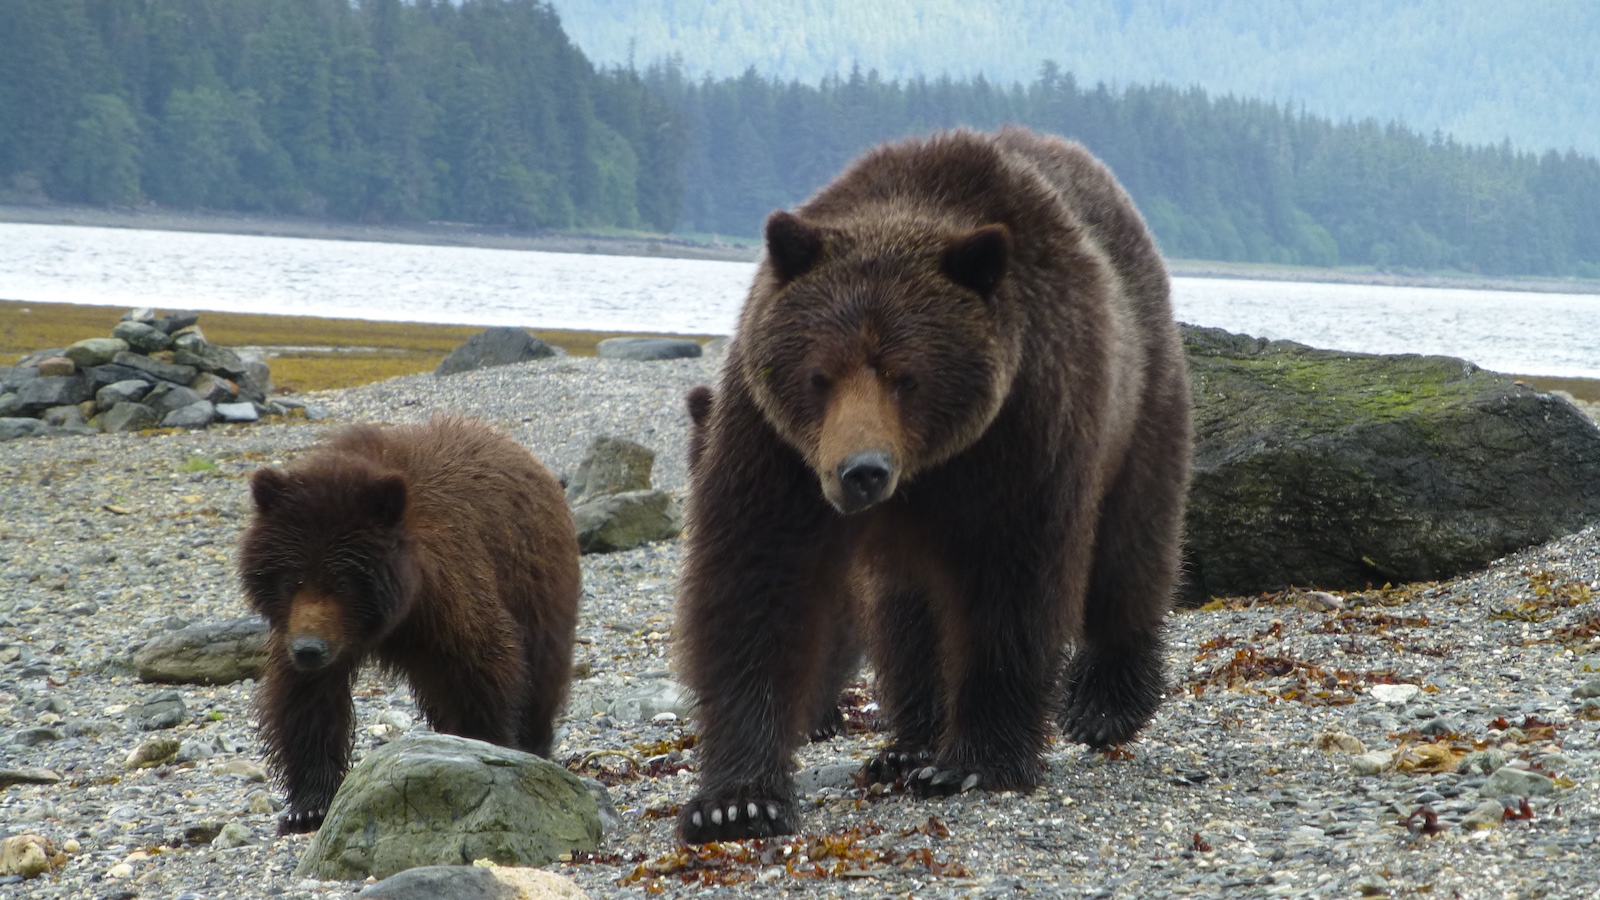 Bears in the Tongass National Forest